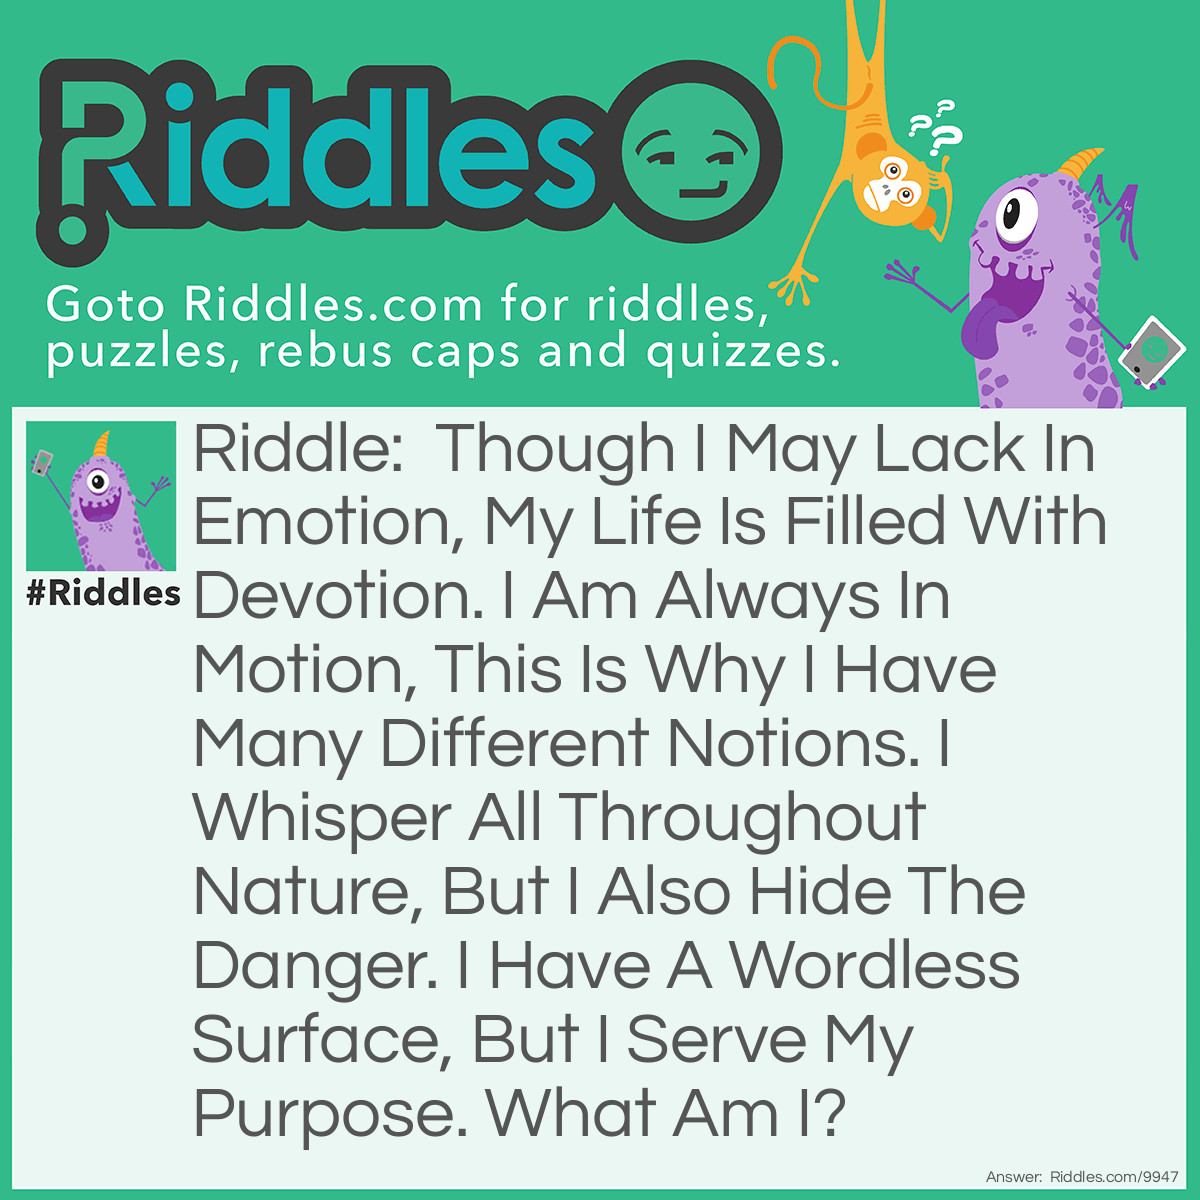 Riddle: Though I may lack in emotion, my life is filled with devotion. I am always in motion, this is why I have many different notions. I whisper all throughout nature, but I also hide the danger. I have a wordless surface, but I serve my purpose. What am I? Answer: Air.